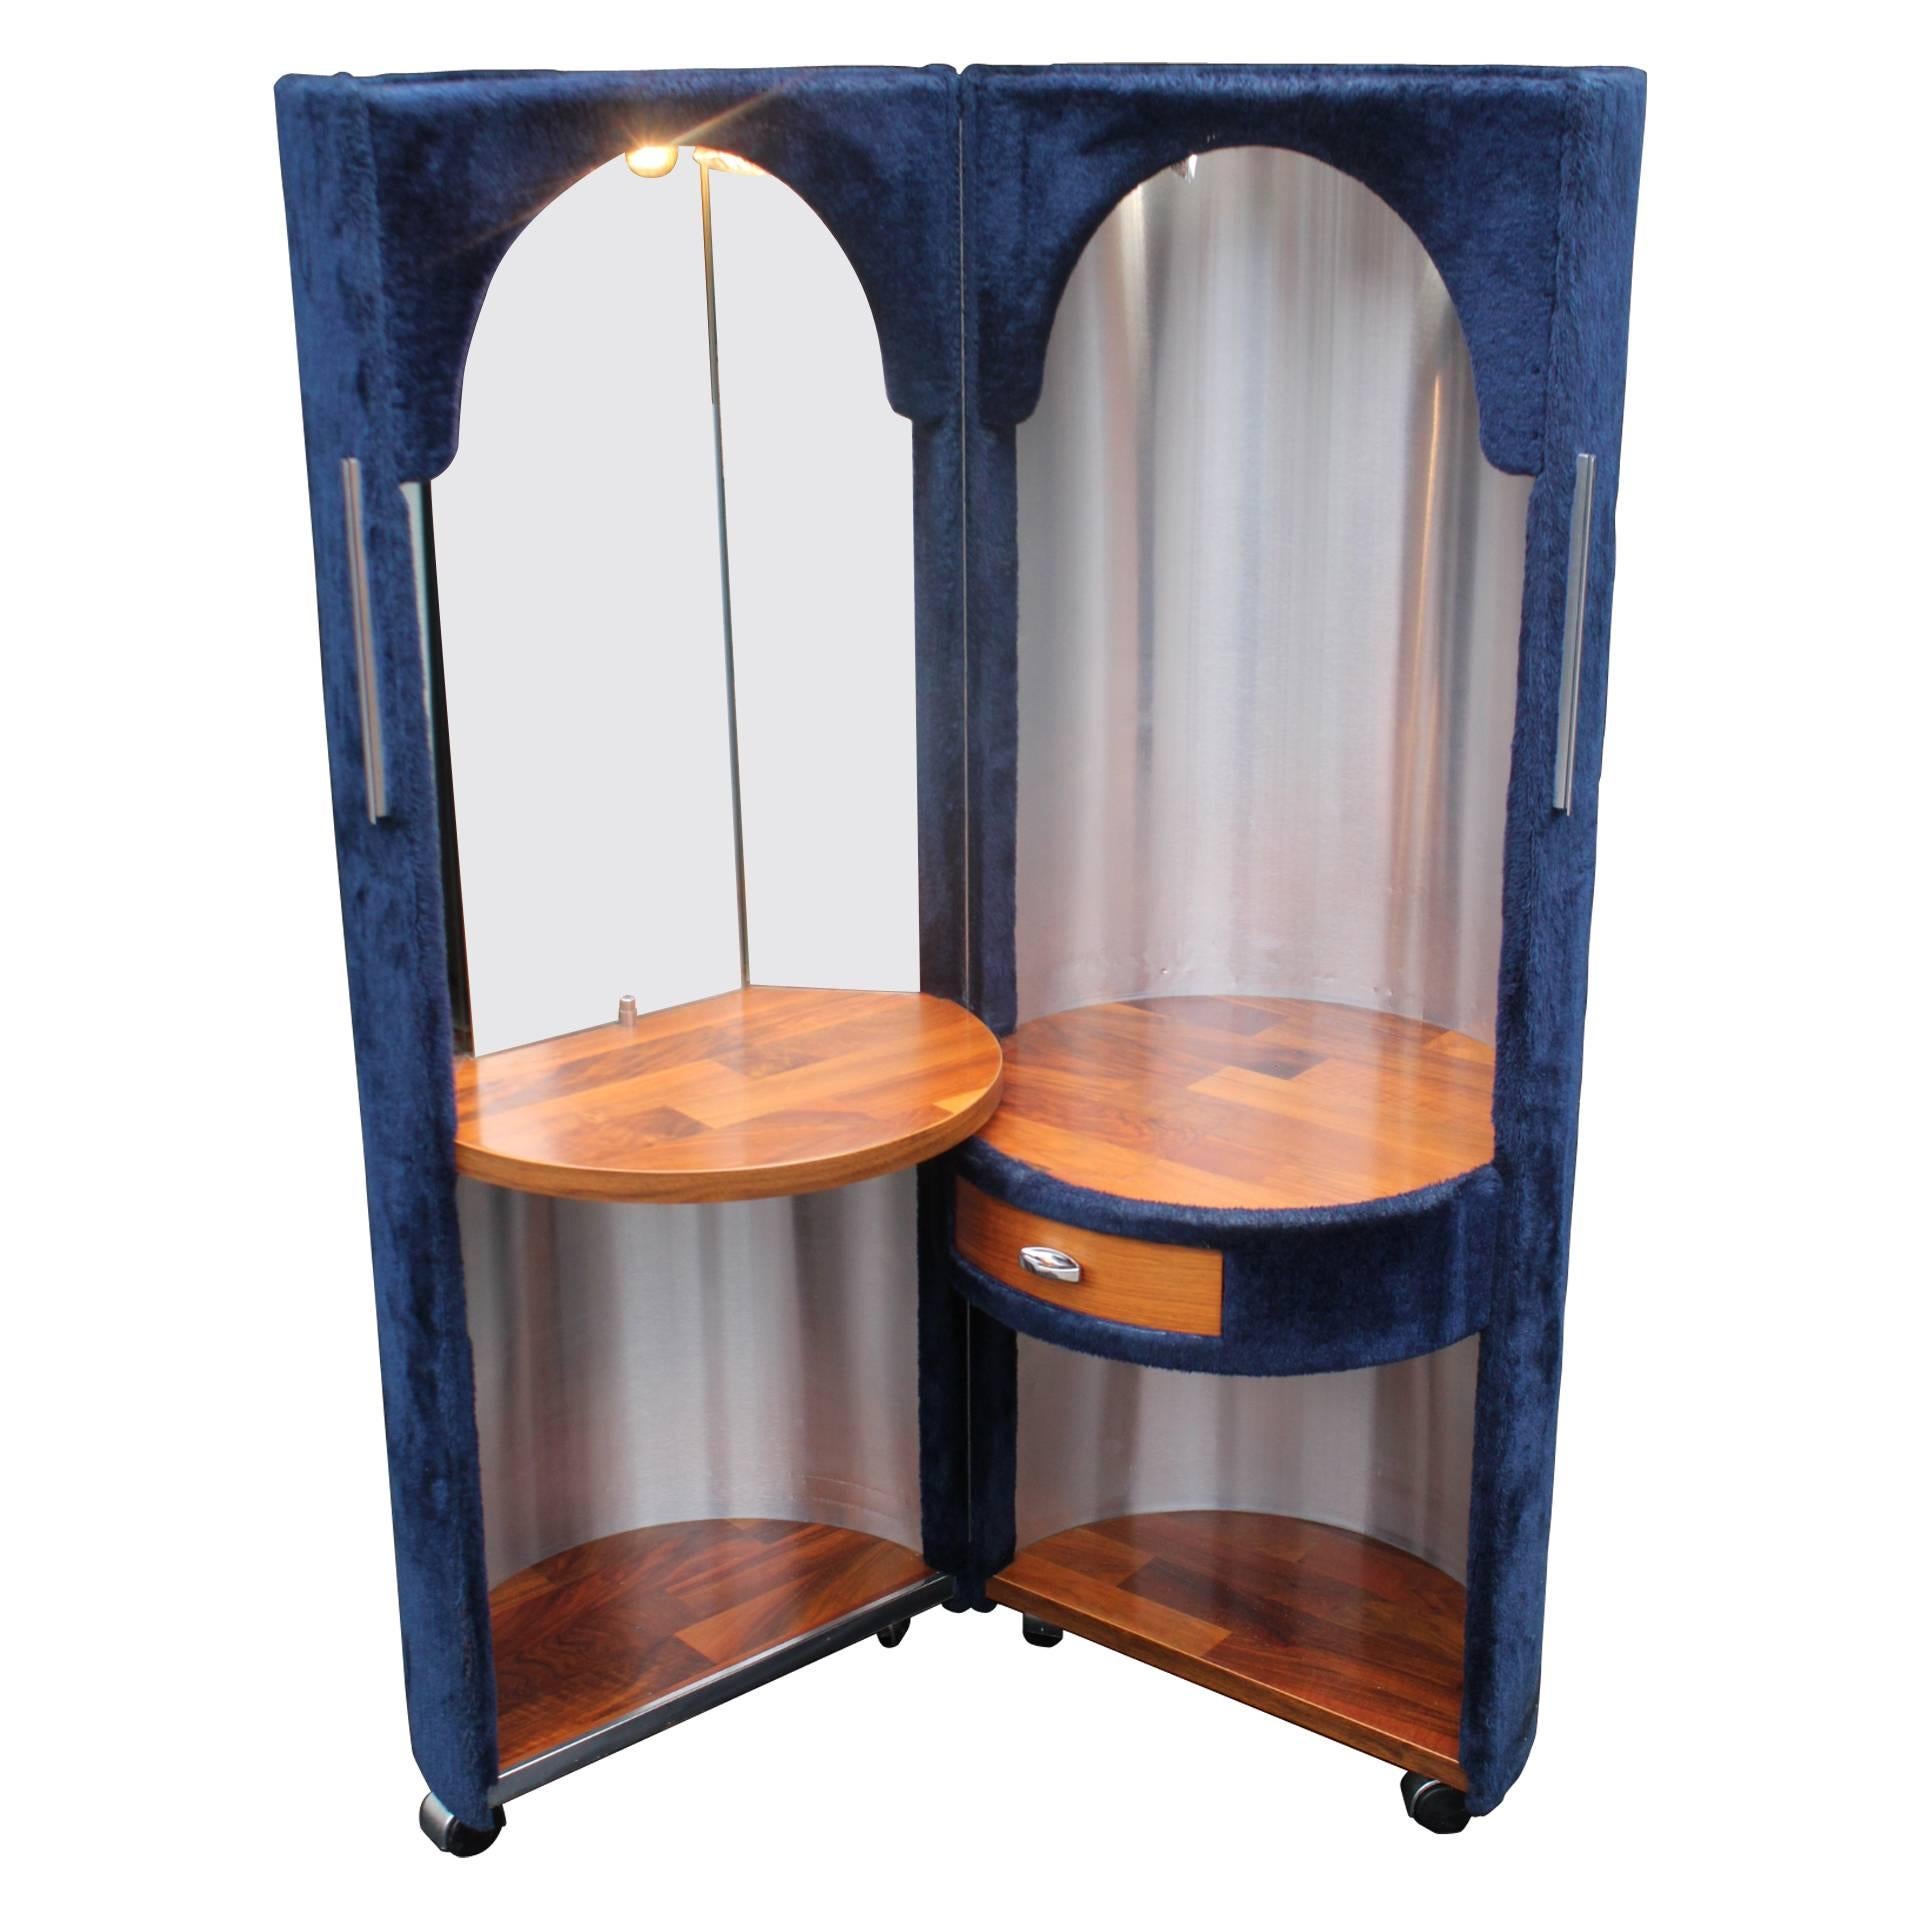 Italy Pop Design Round Mirrored Vanity Attributed to Poltrona Frau, 1970s  For Sale